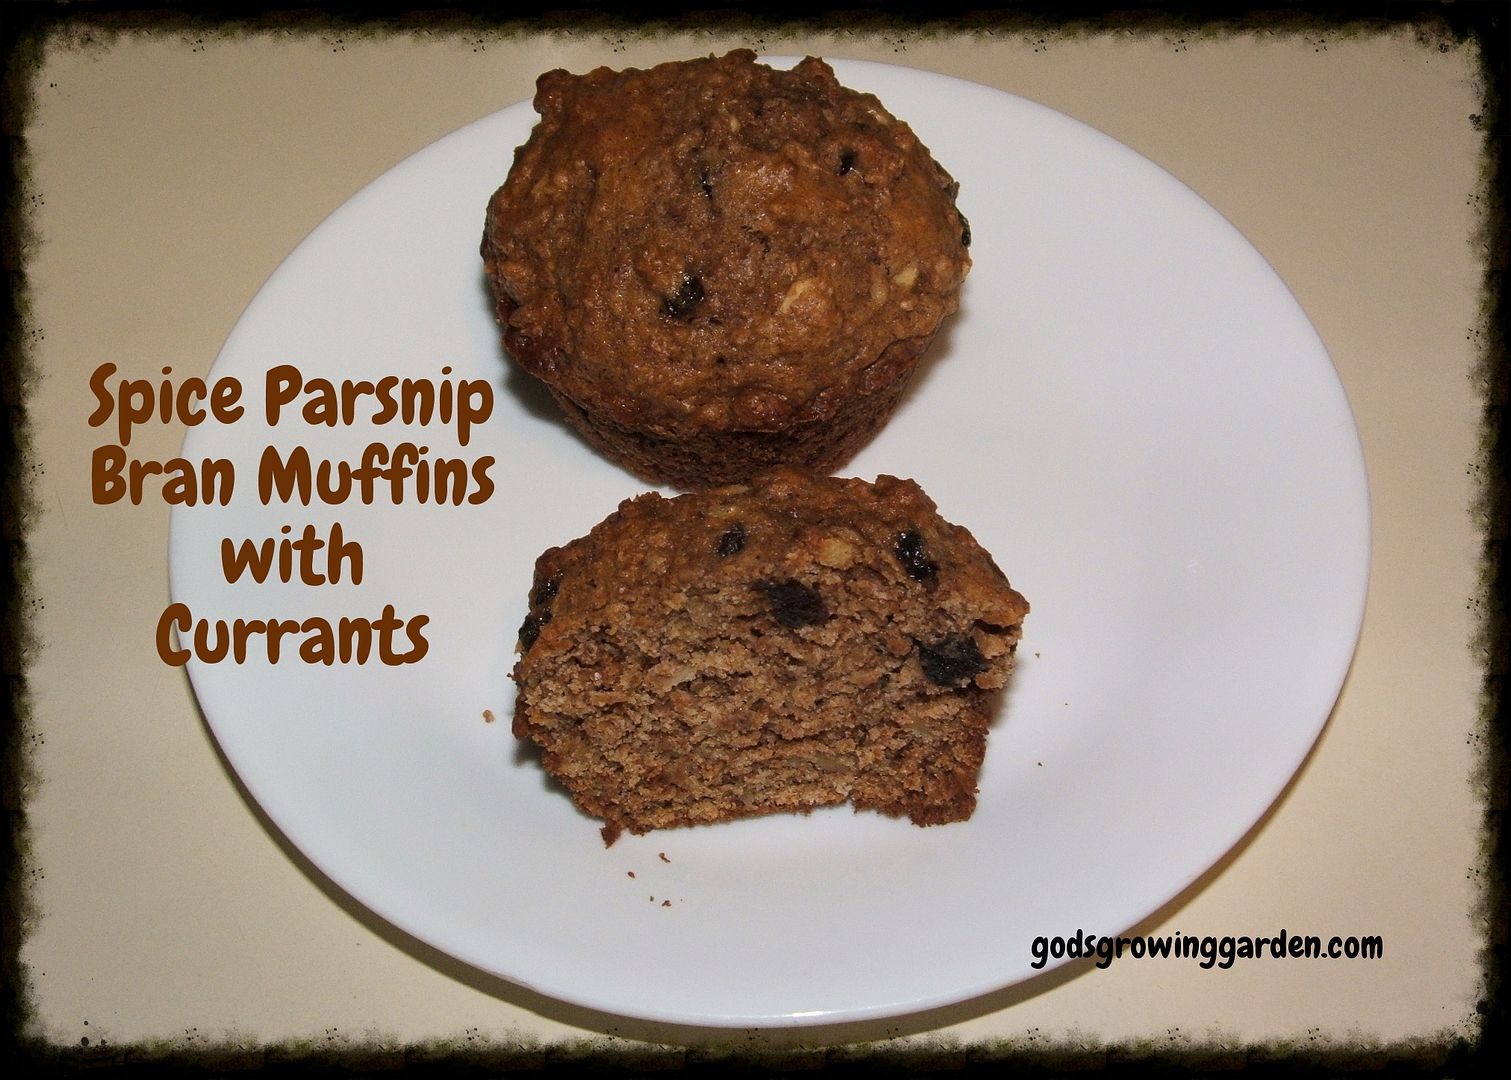 Spice Parsnip Bran Muffins by Angie Ouellette-Tower for godsgrowinggarden.com photo 004_zpsec34be23.jpg